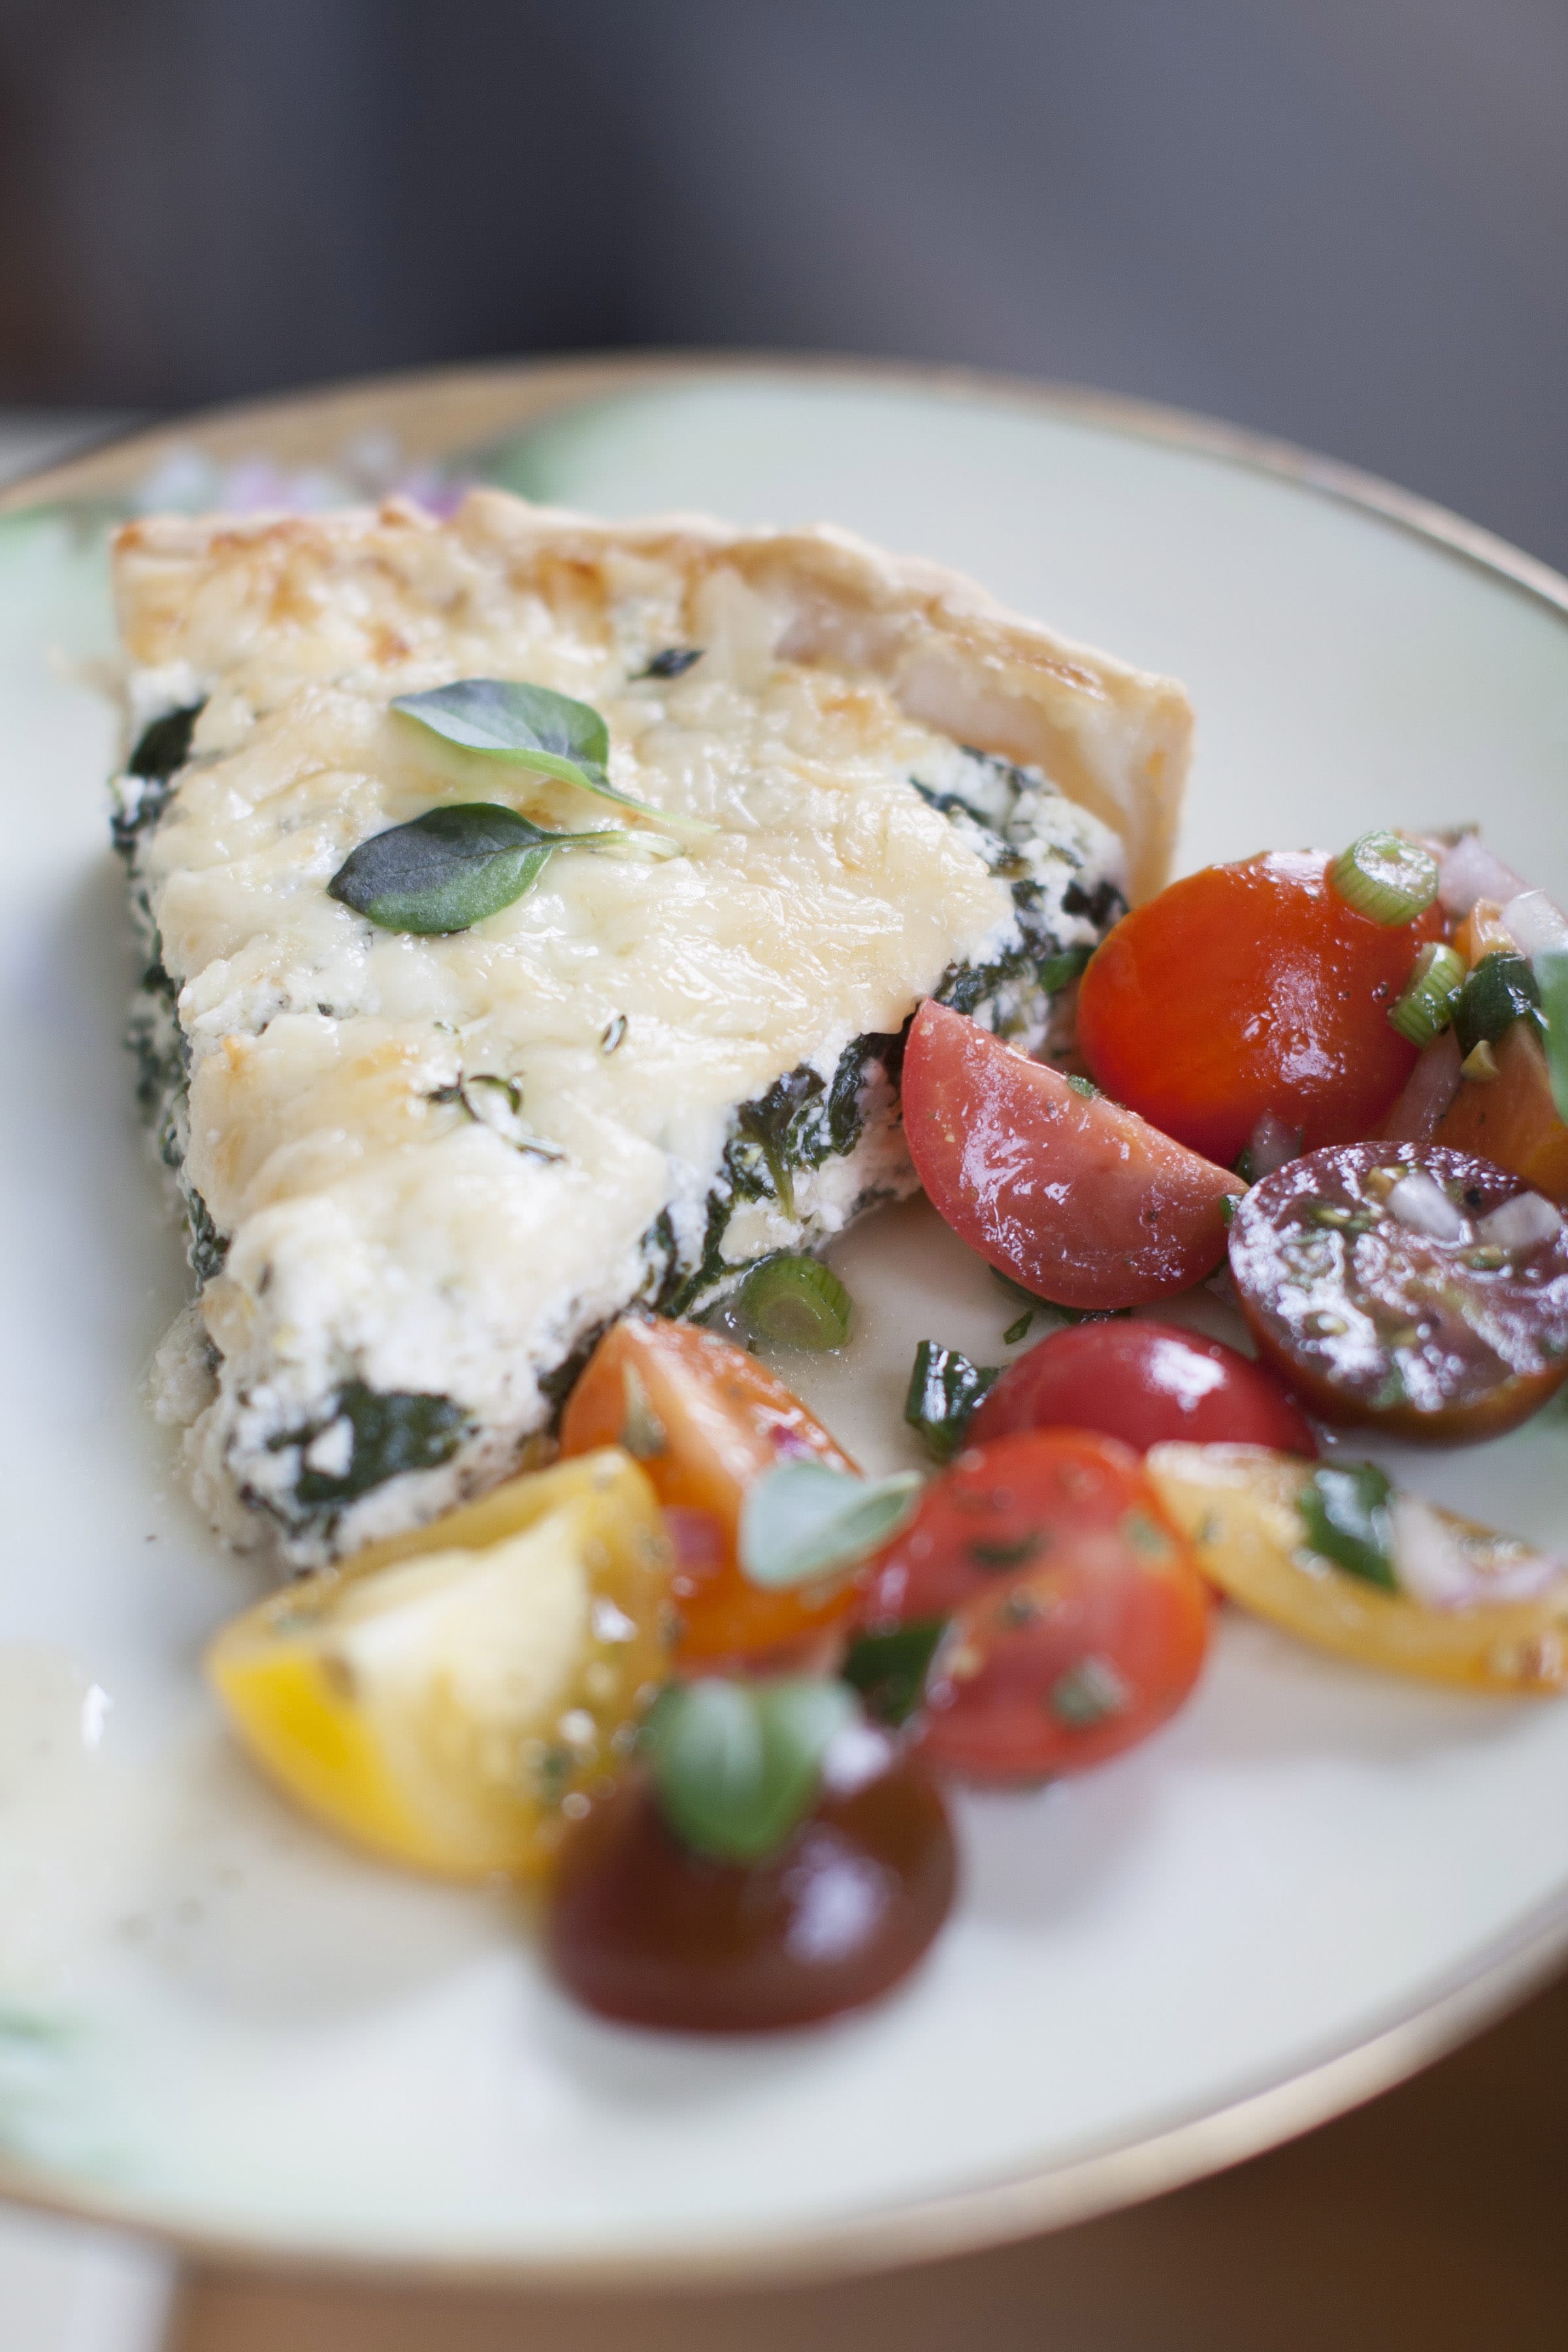 This Ricotta Spinach Tart, similar to lasagna and quiche, can be served hot or at room temperature.